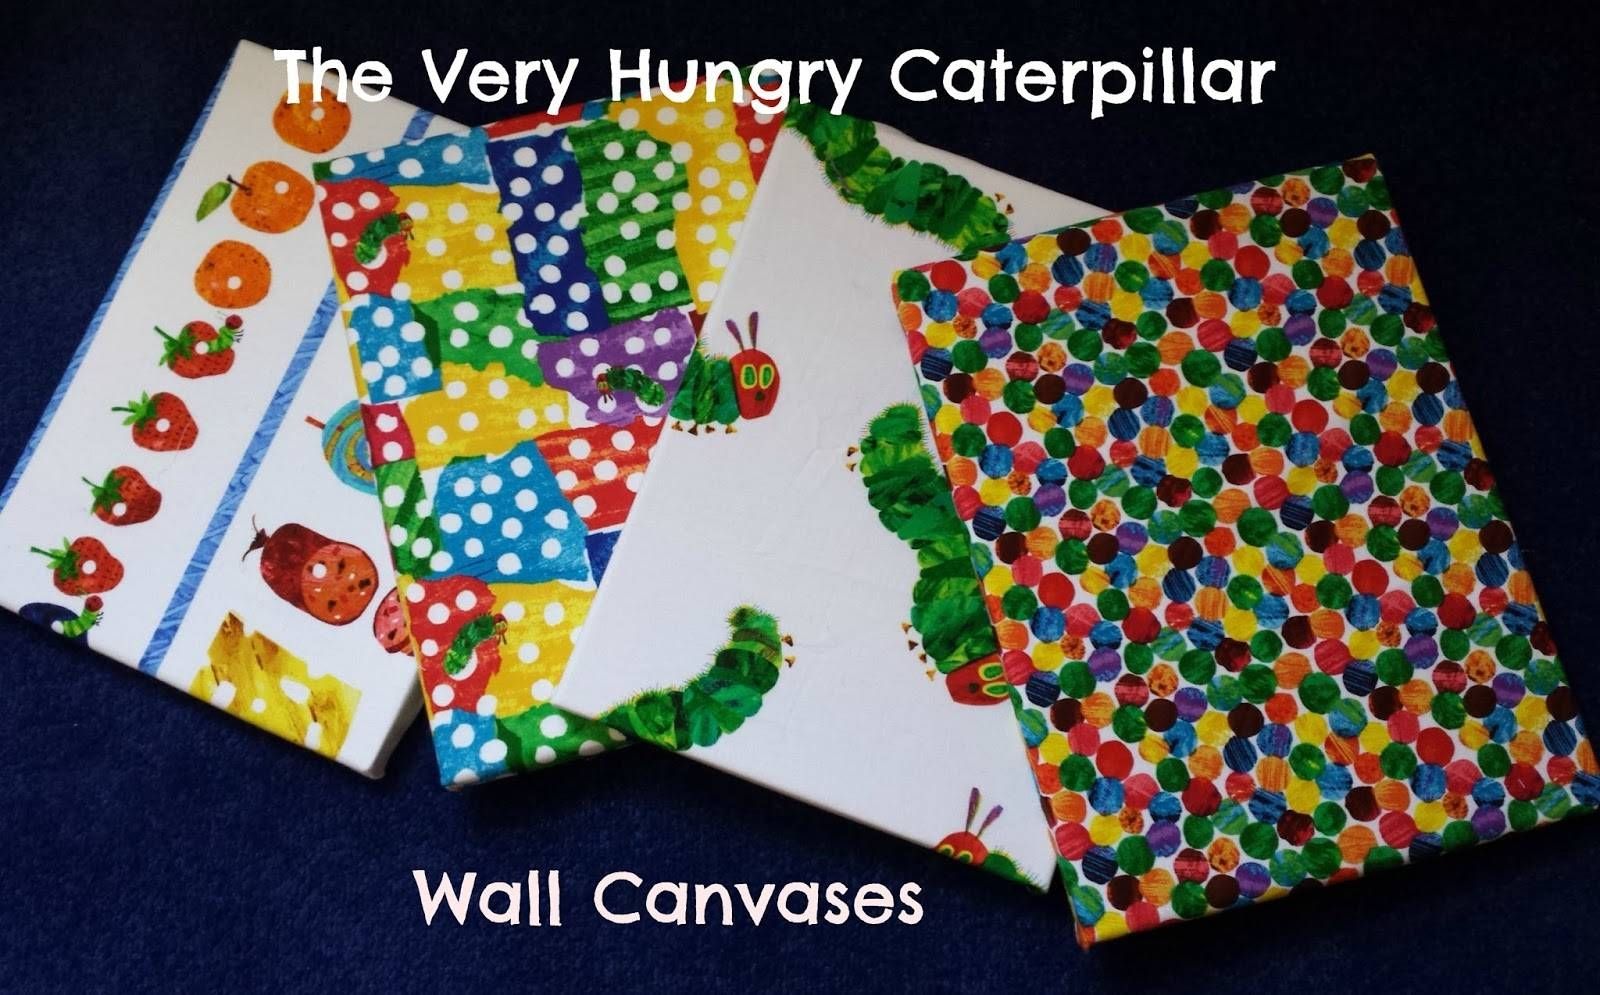 The Adventure Of Parenthood: How To Make Very Hungry Caterpillar With Regard To Latest The Very Hungry Caterpillar Wall Art (View 1 of 25)